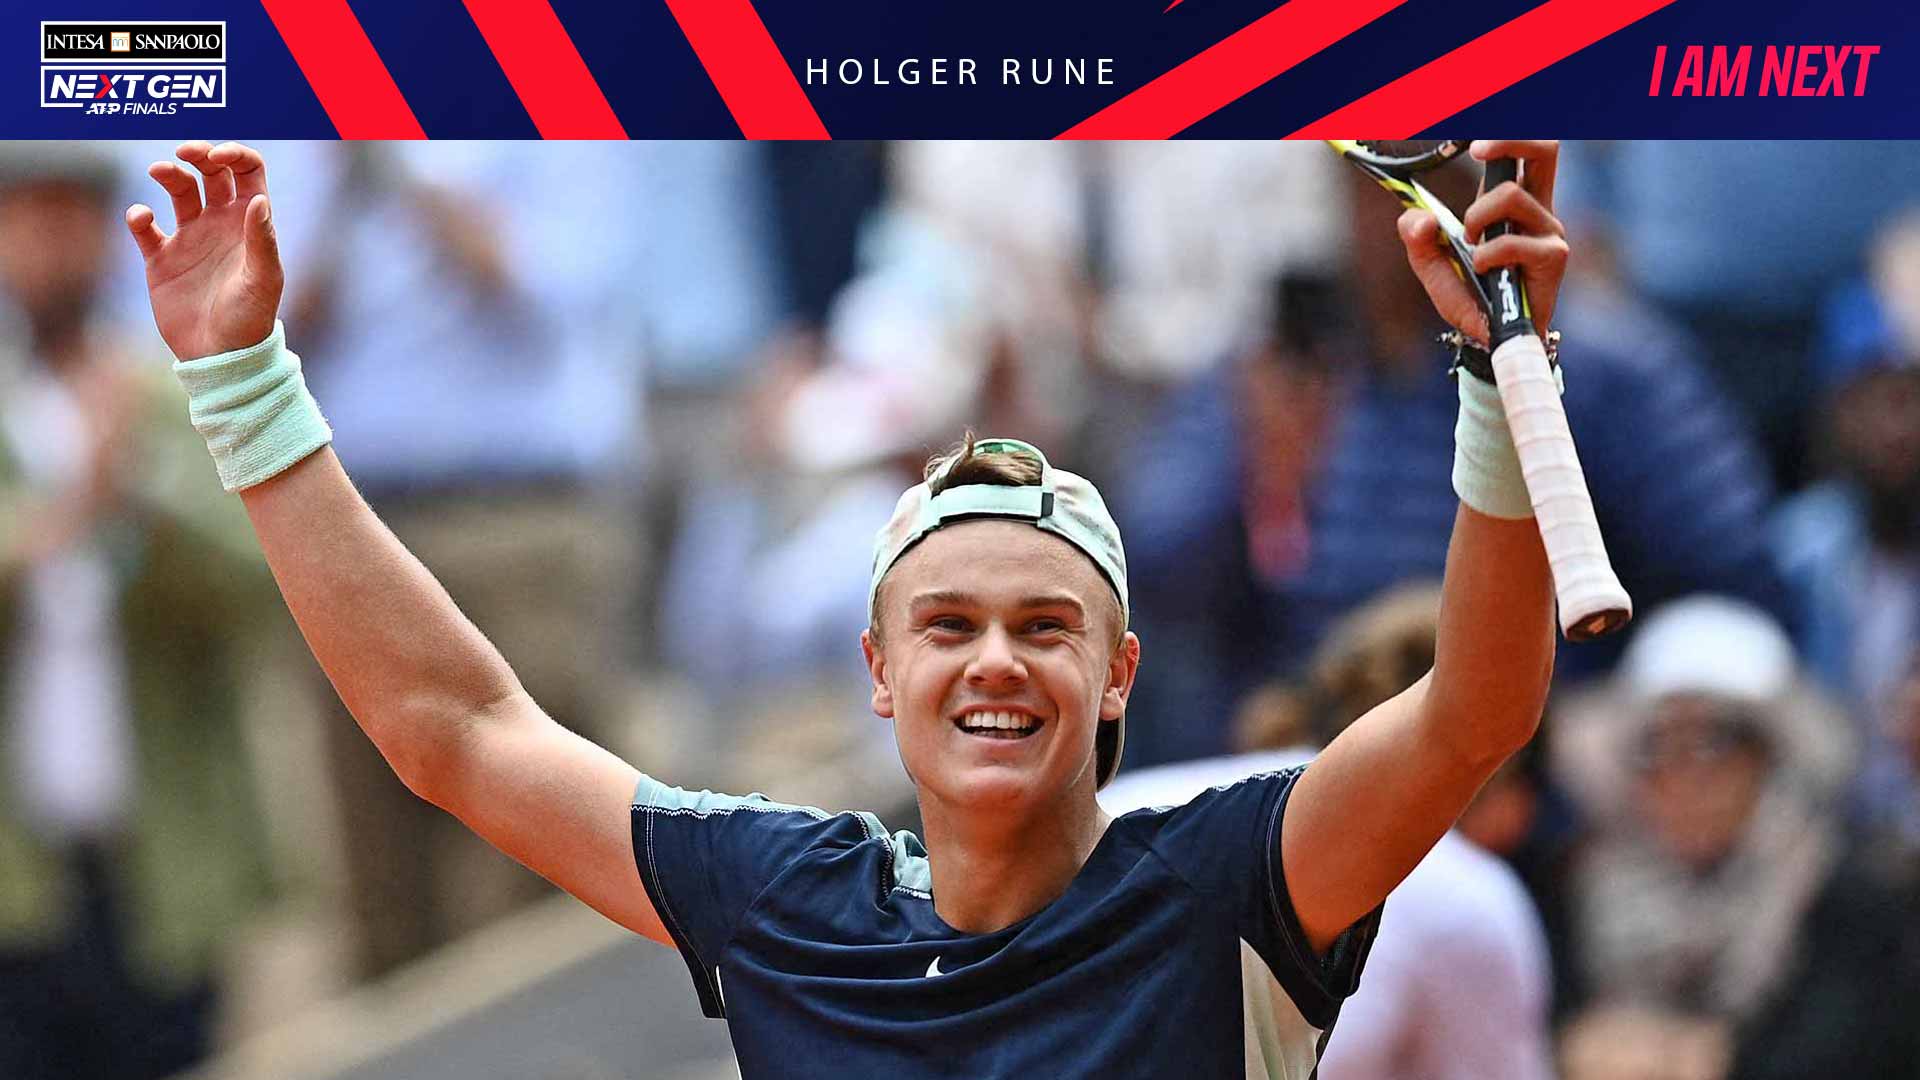 Holger Rune is now number 5 i the Live ATP Ranking : r/tennis